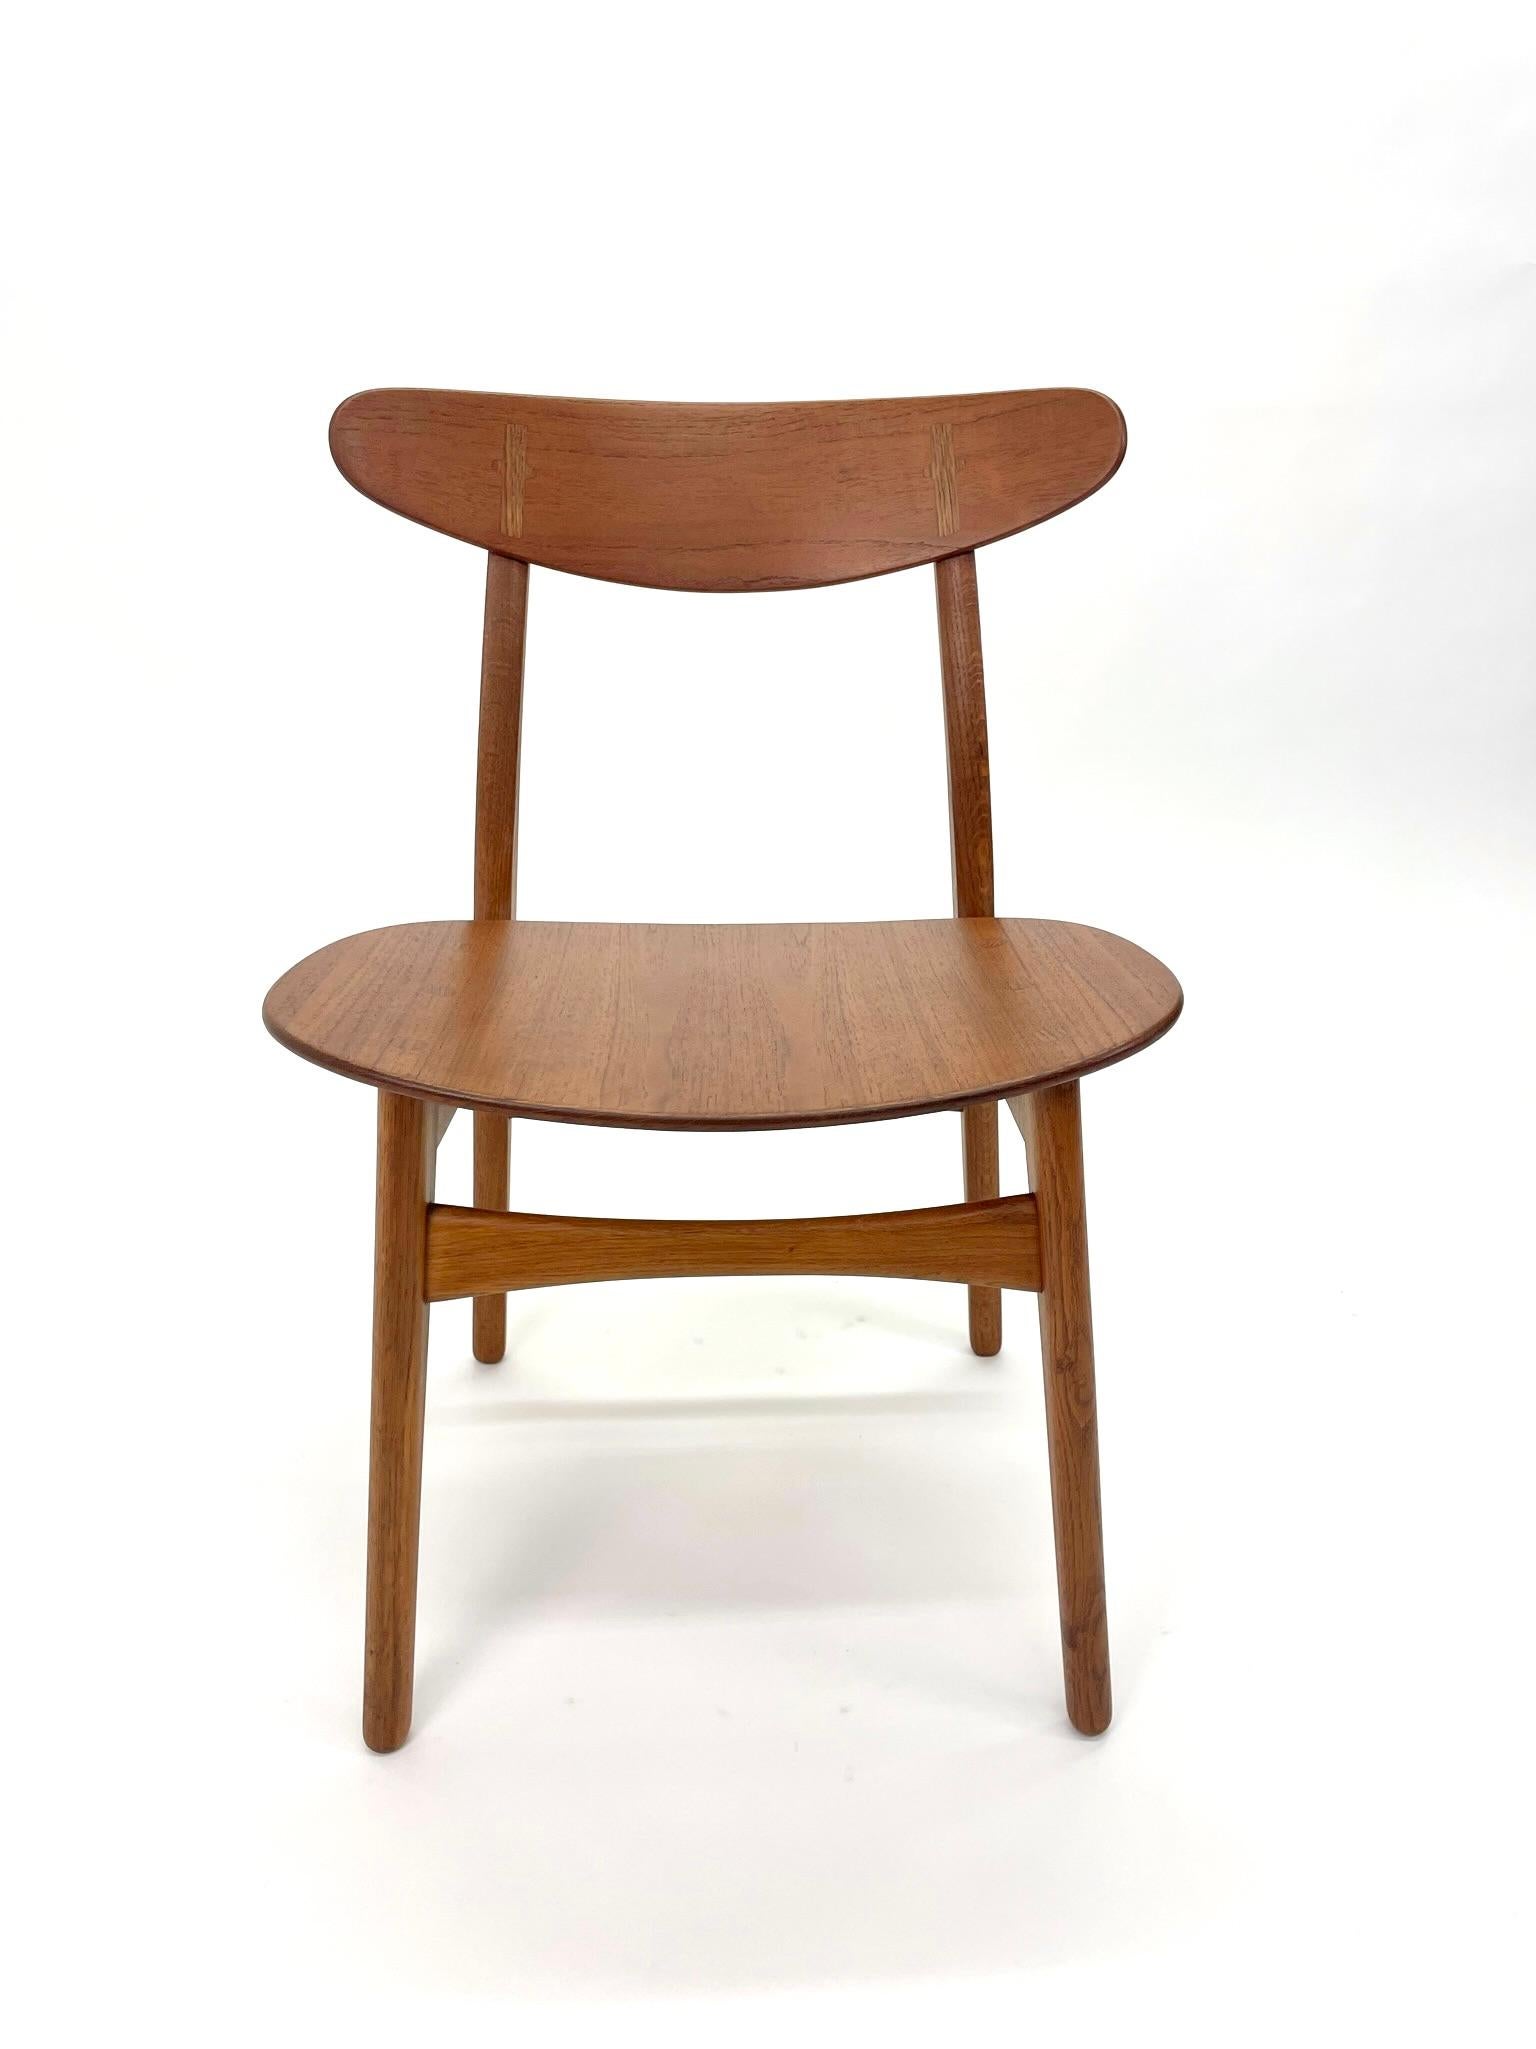 American Set of 4 Hans Wegner CH-30 Dining Chair for Carl Hansen and Son